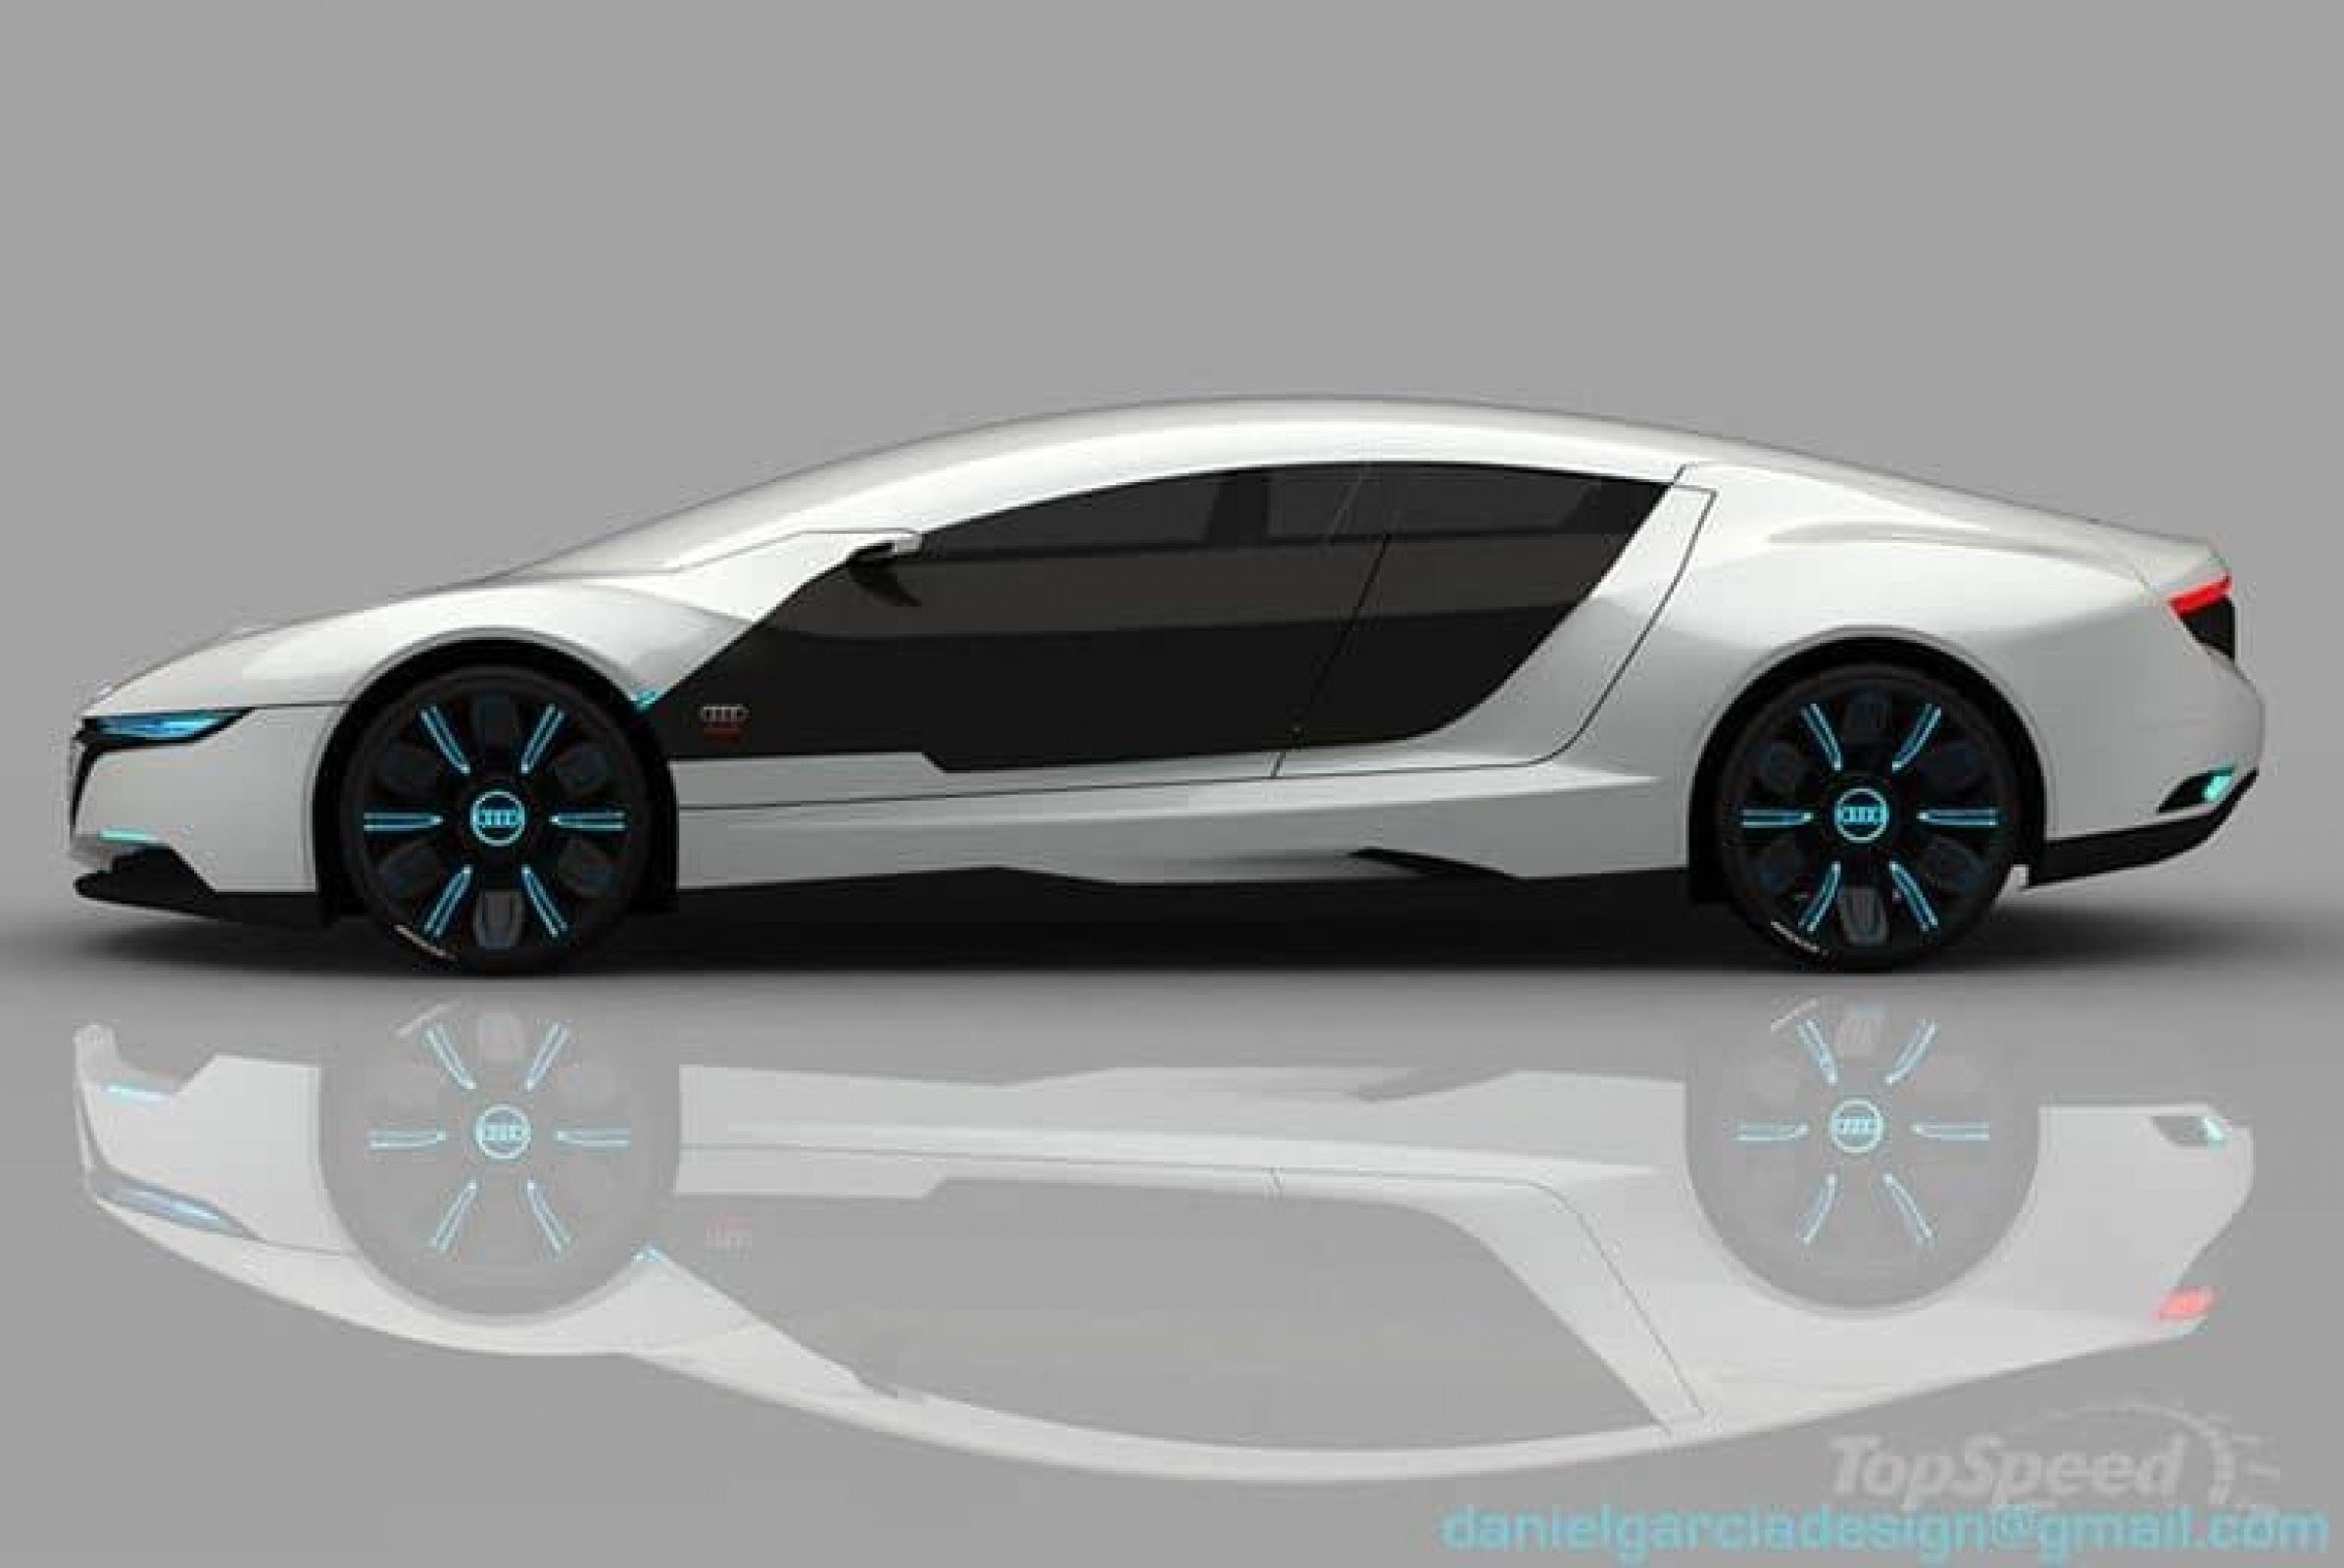 Audi A9 Concept Car Repairs Itself And Changes Color